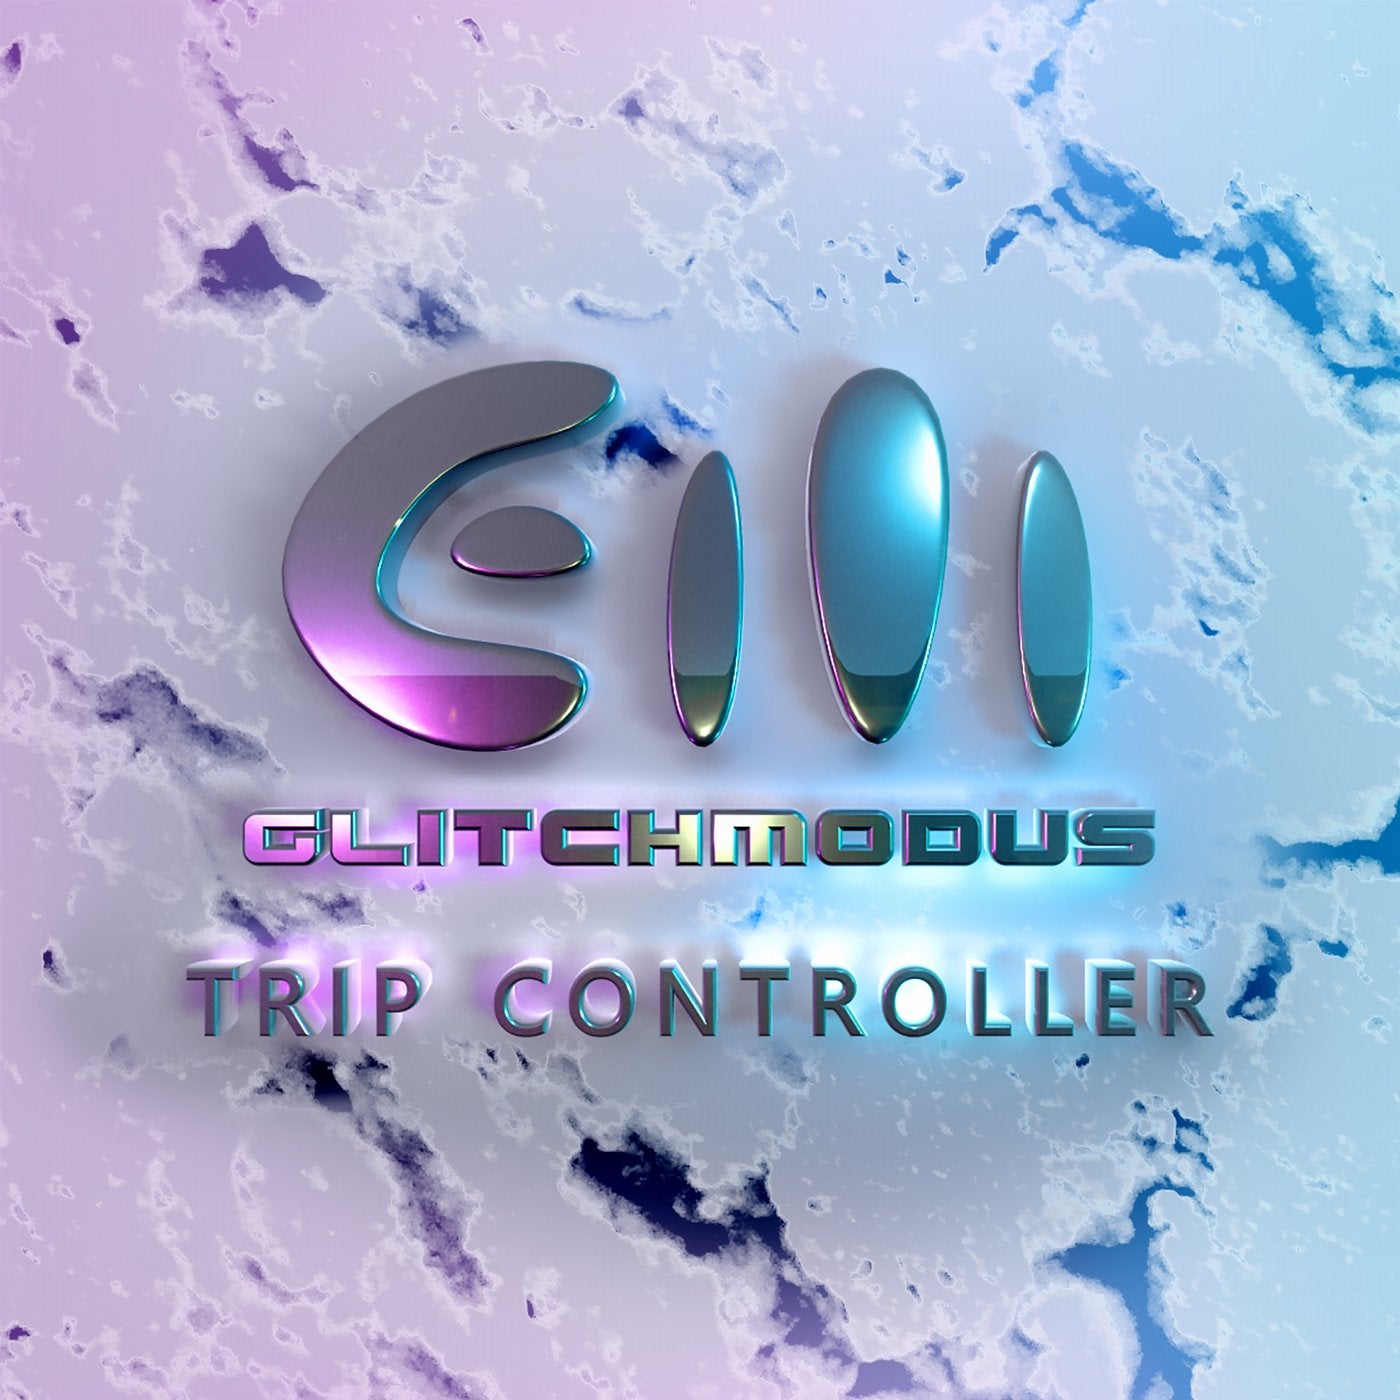 The Trip Controller